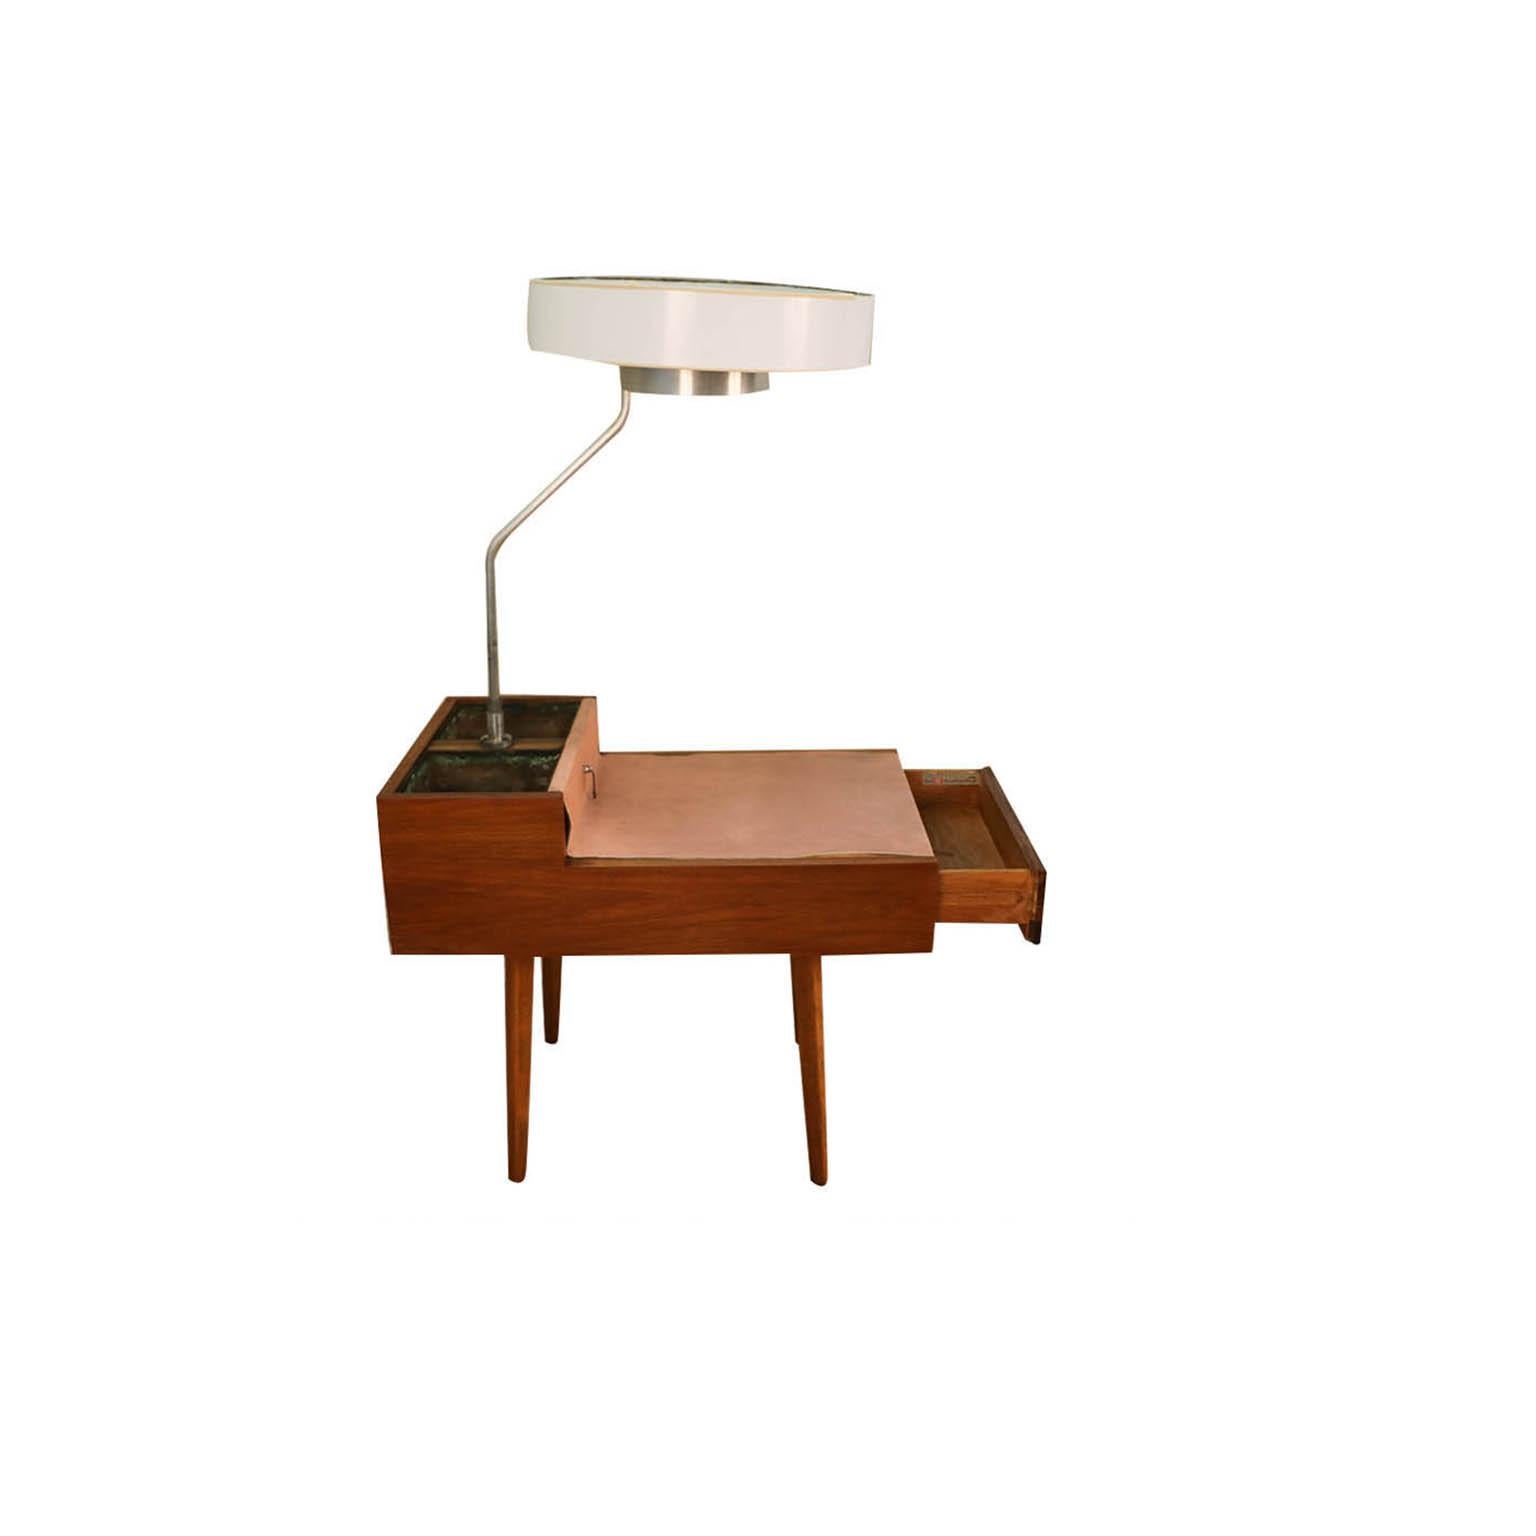 Unique and rare Mid-Century Modern Model 4634-L side table with lamp and planters designed by George Nelson for Herman Miller, circa 1940s. Featuring a handsome walnut case with a coordinating and complimenting leather tabletop. A lamp rises from